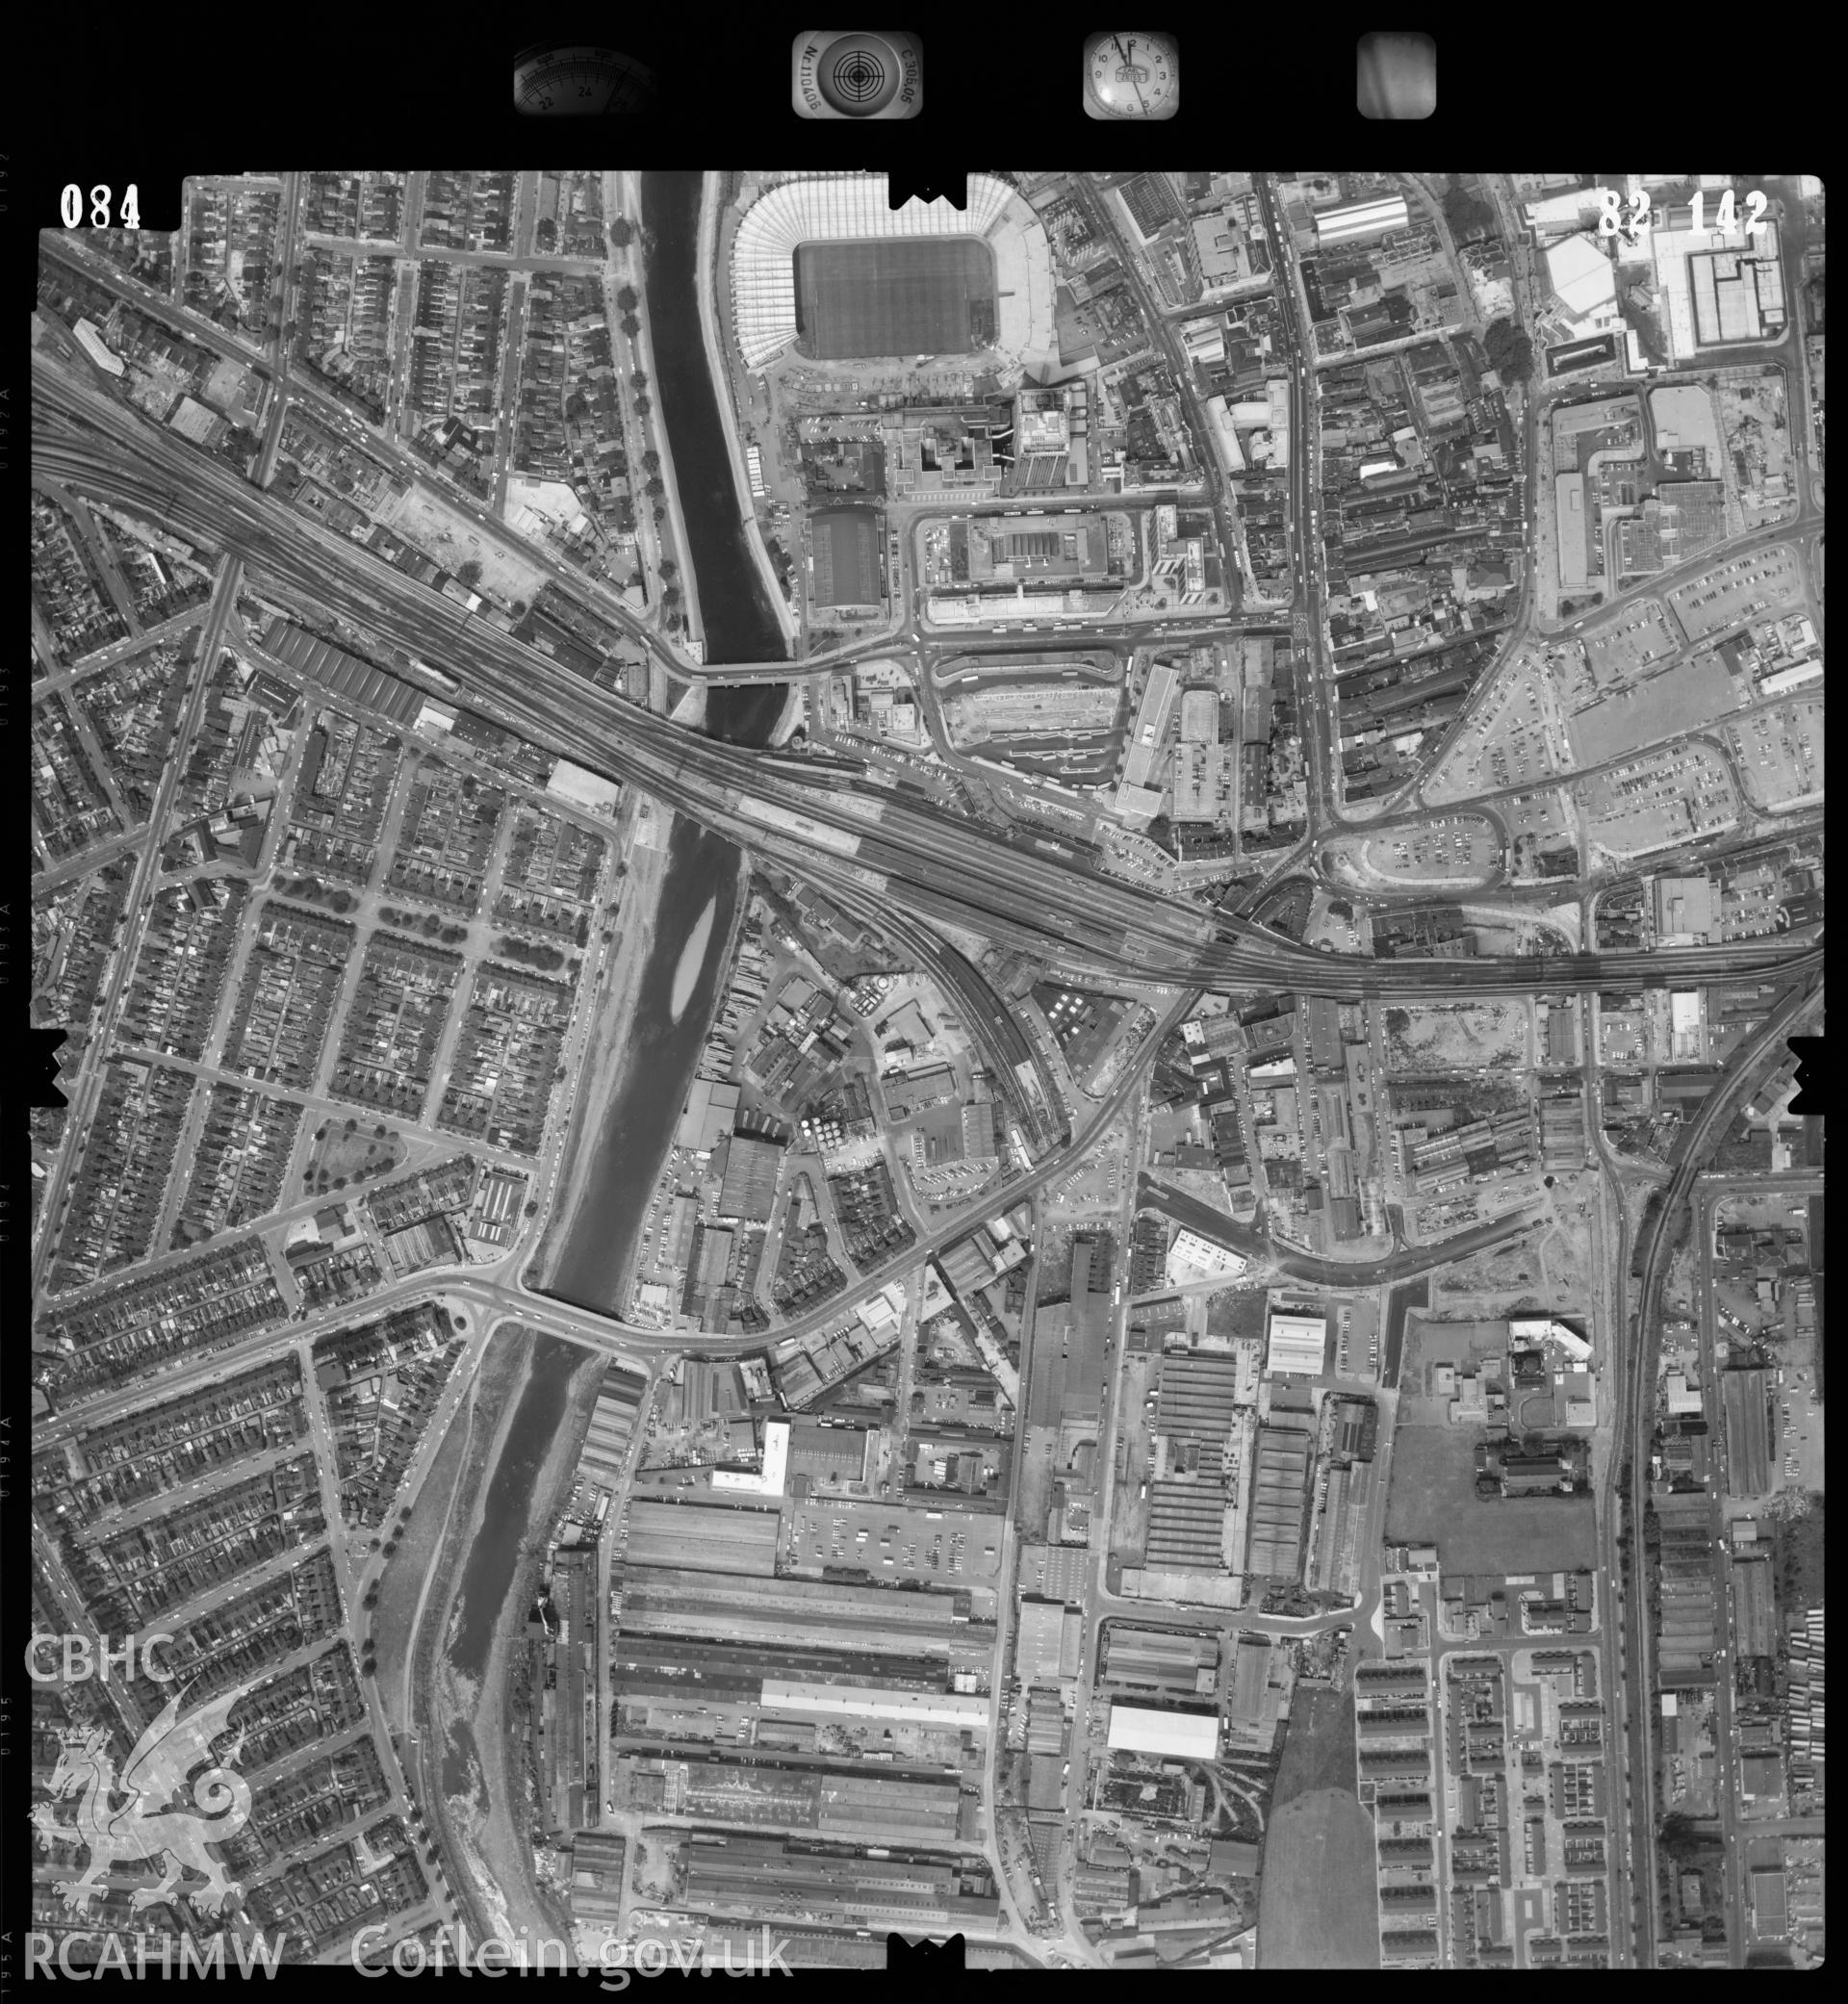 Digitized copy of an aerial photograph showing the Riverside area of Cardiff, taken by Ordnance Survey, 1982.